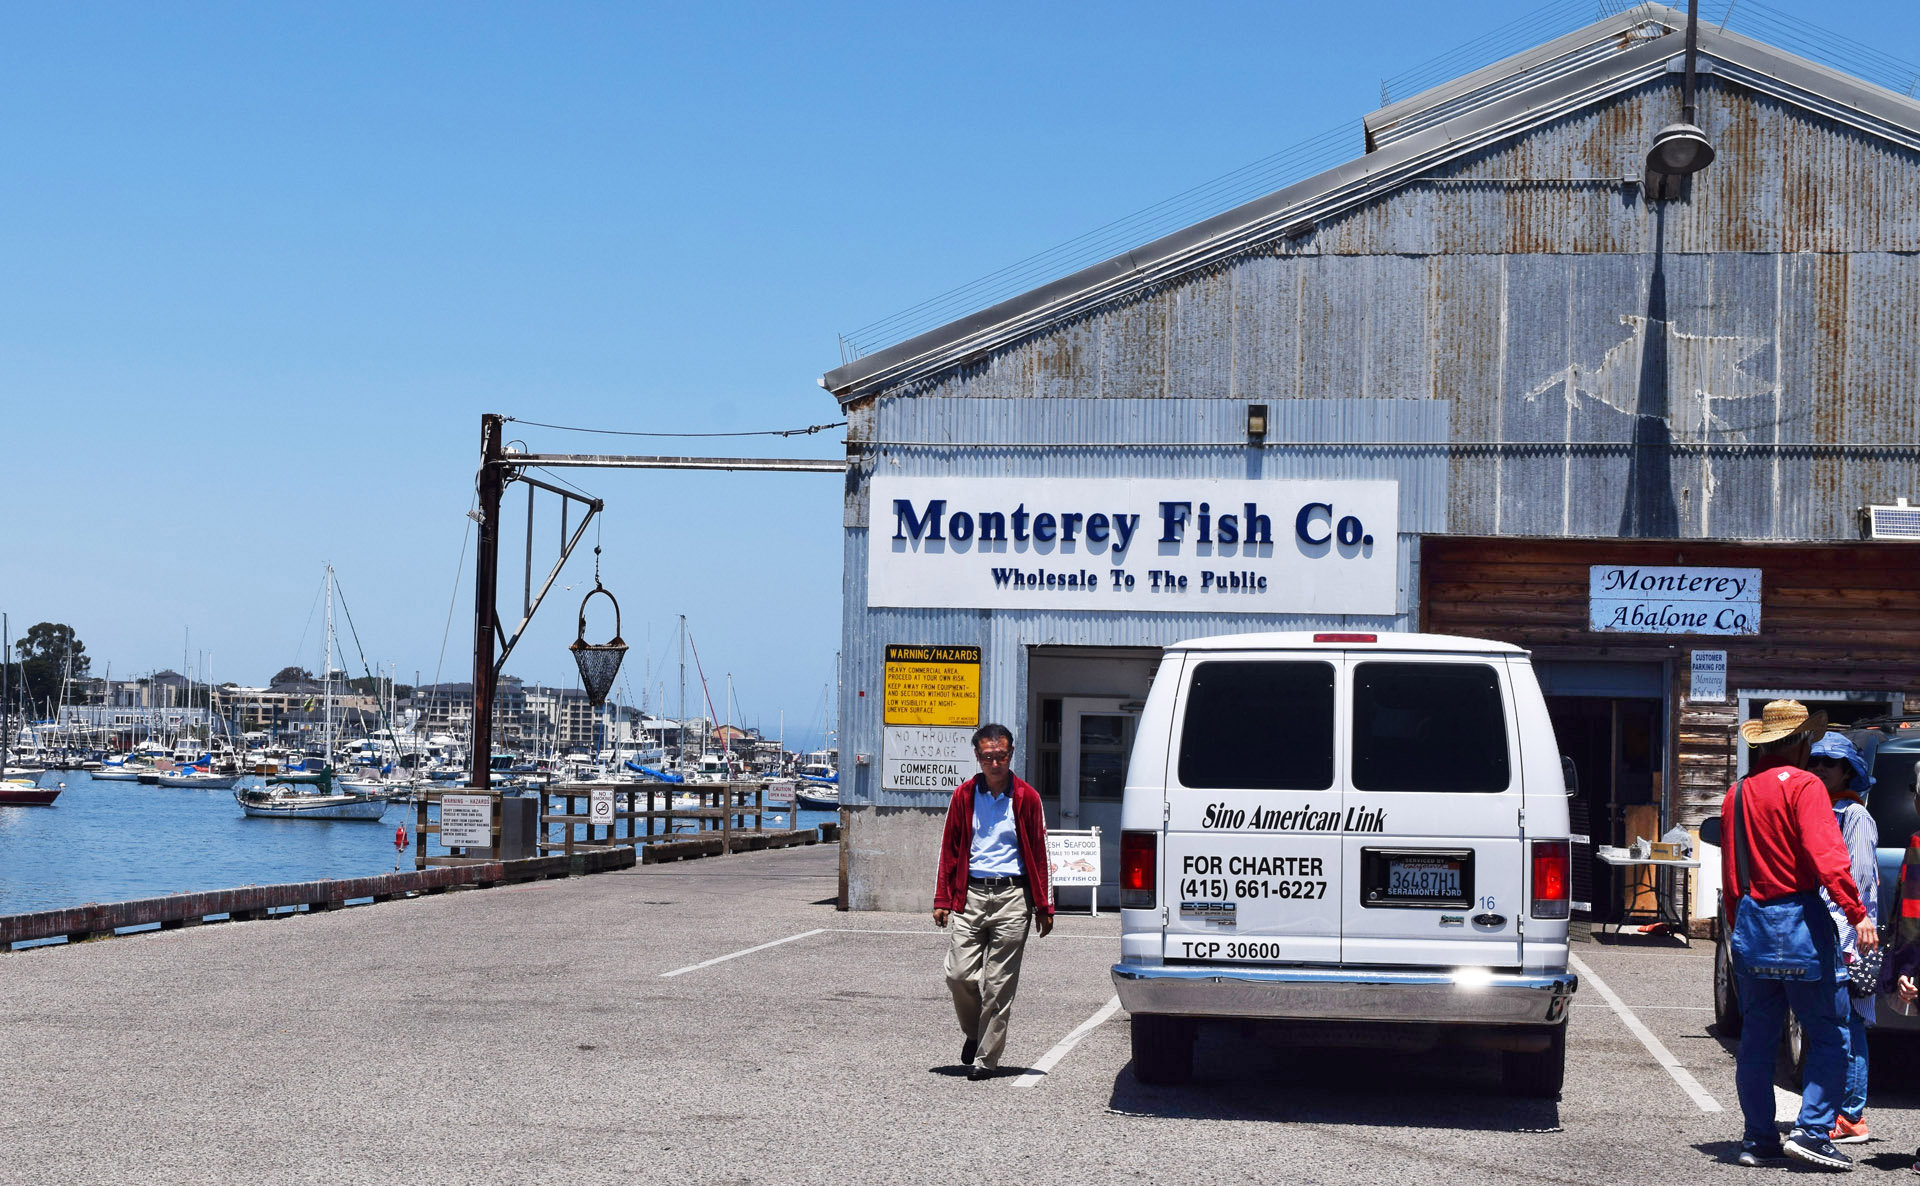 With its farm located under this municipal pier, Monterey Abalone Company (right) has a tiny office with a trapdoor and ladder that accesses its growing abalone population.